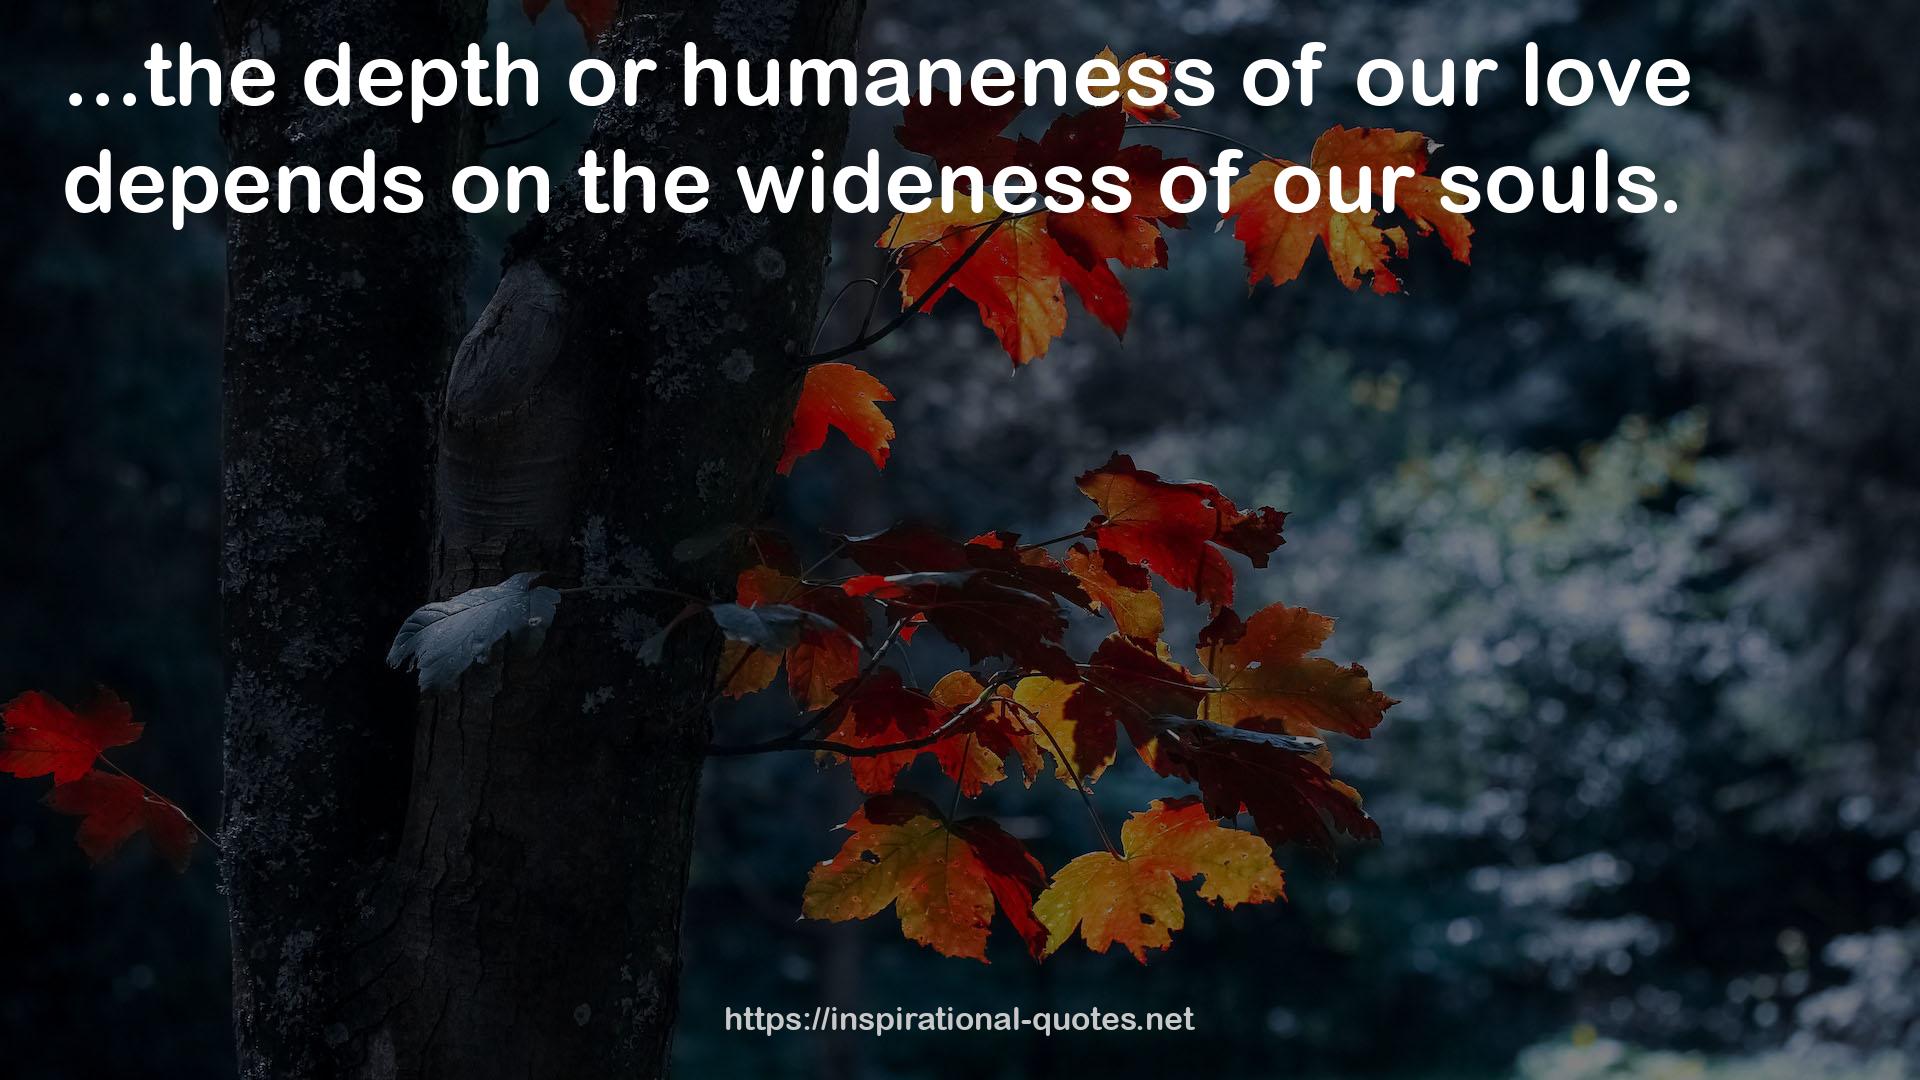 humaneness  QUOTES